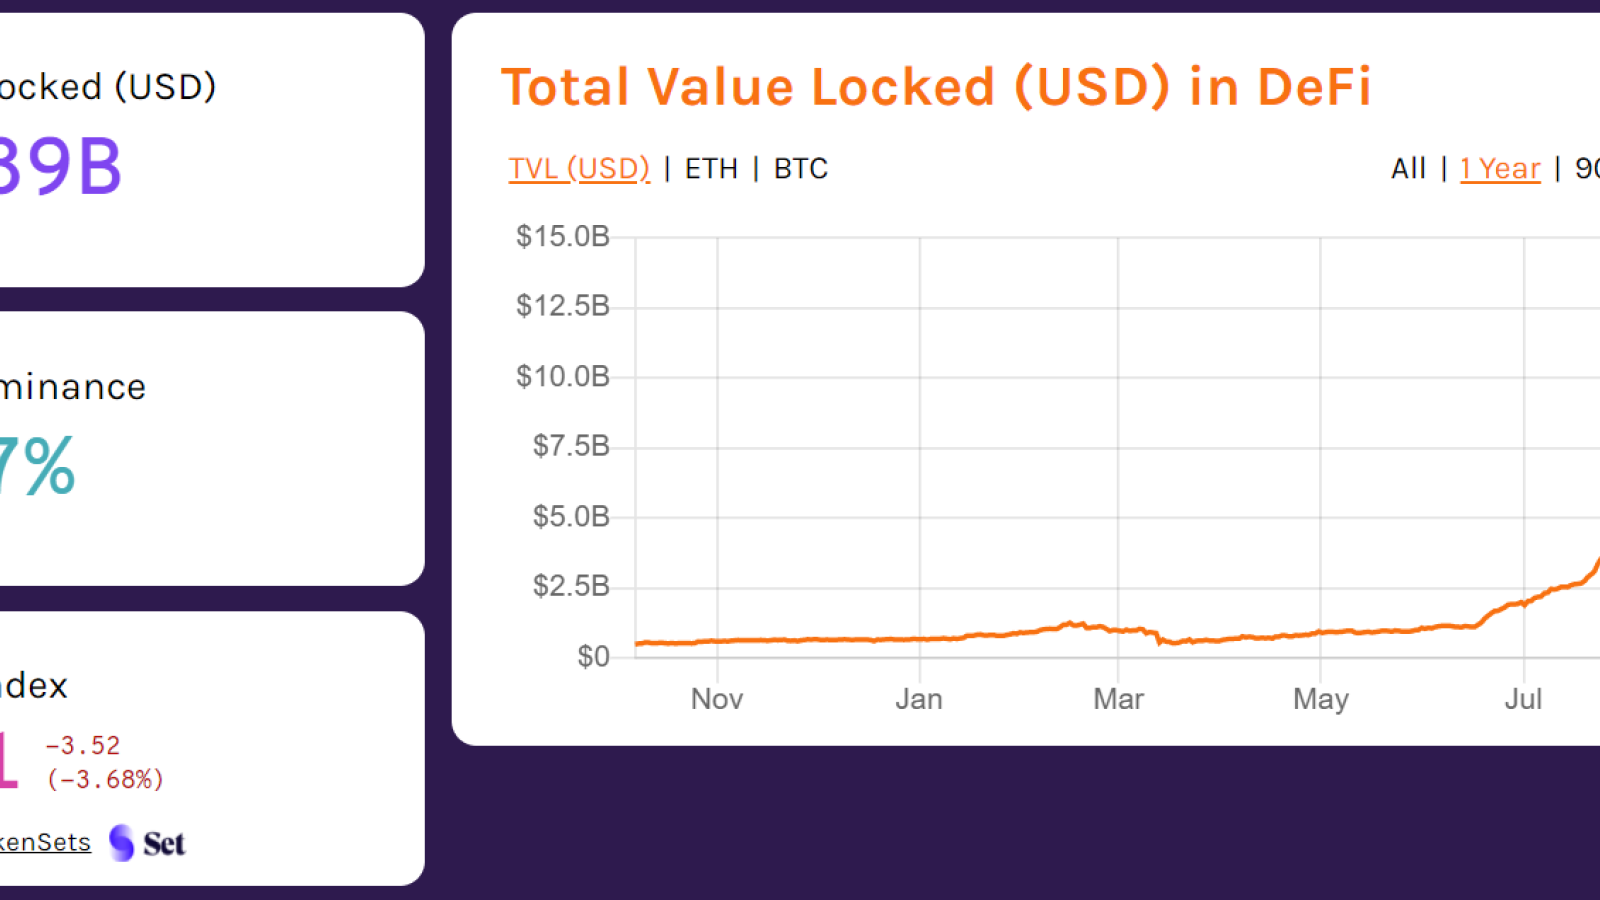 Total value locked in DeFi in the past year